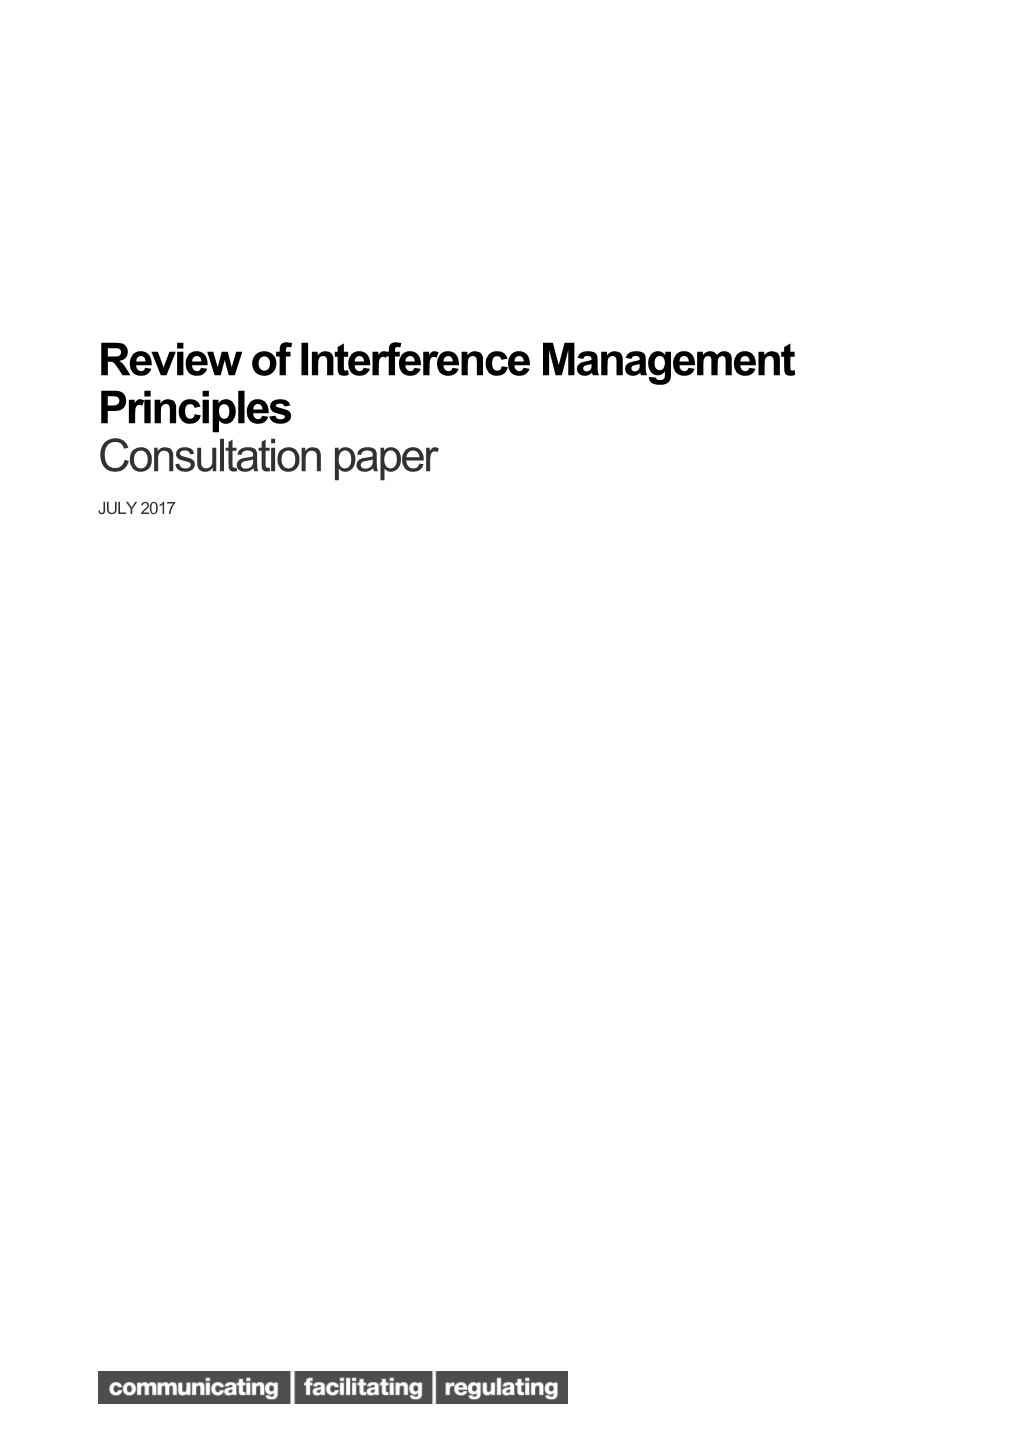 Review of Interference Management Principles